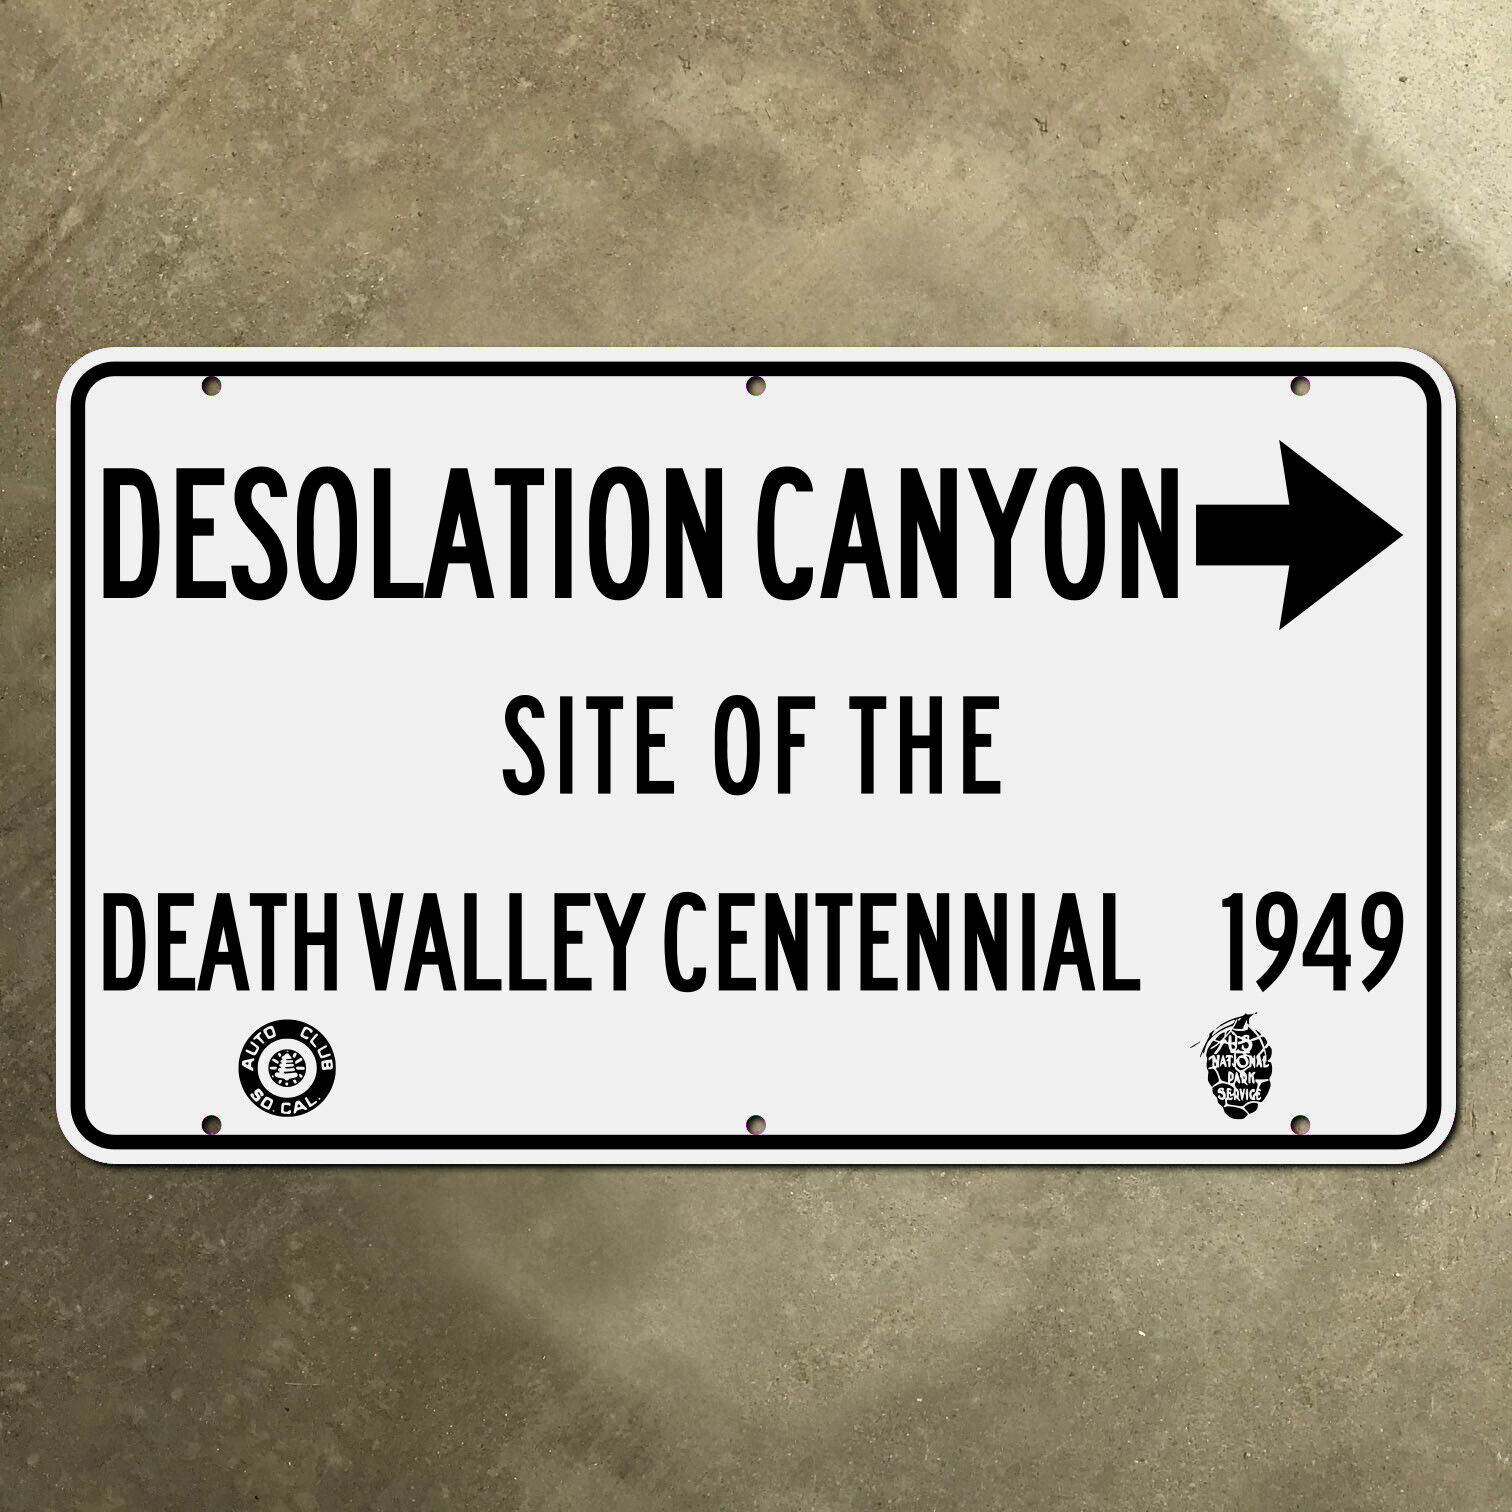 ACSC NPS Desolation Canyon highway sign Death Valley California 1949 49ers 24x14